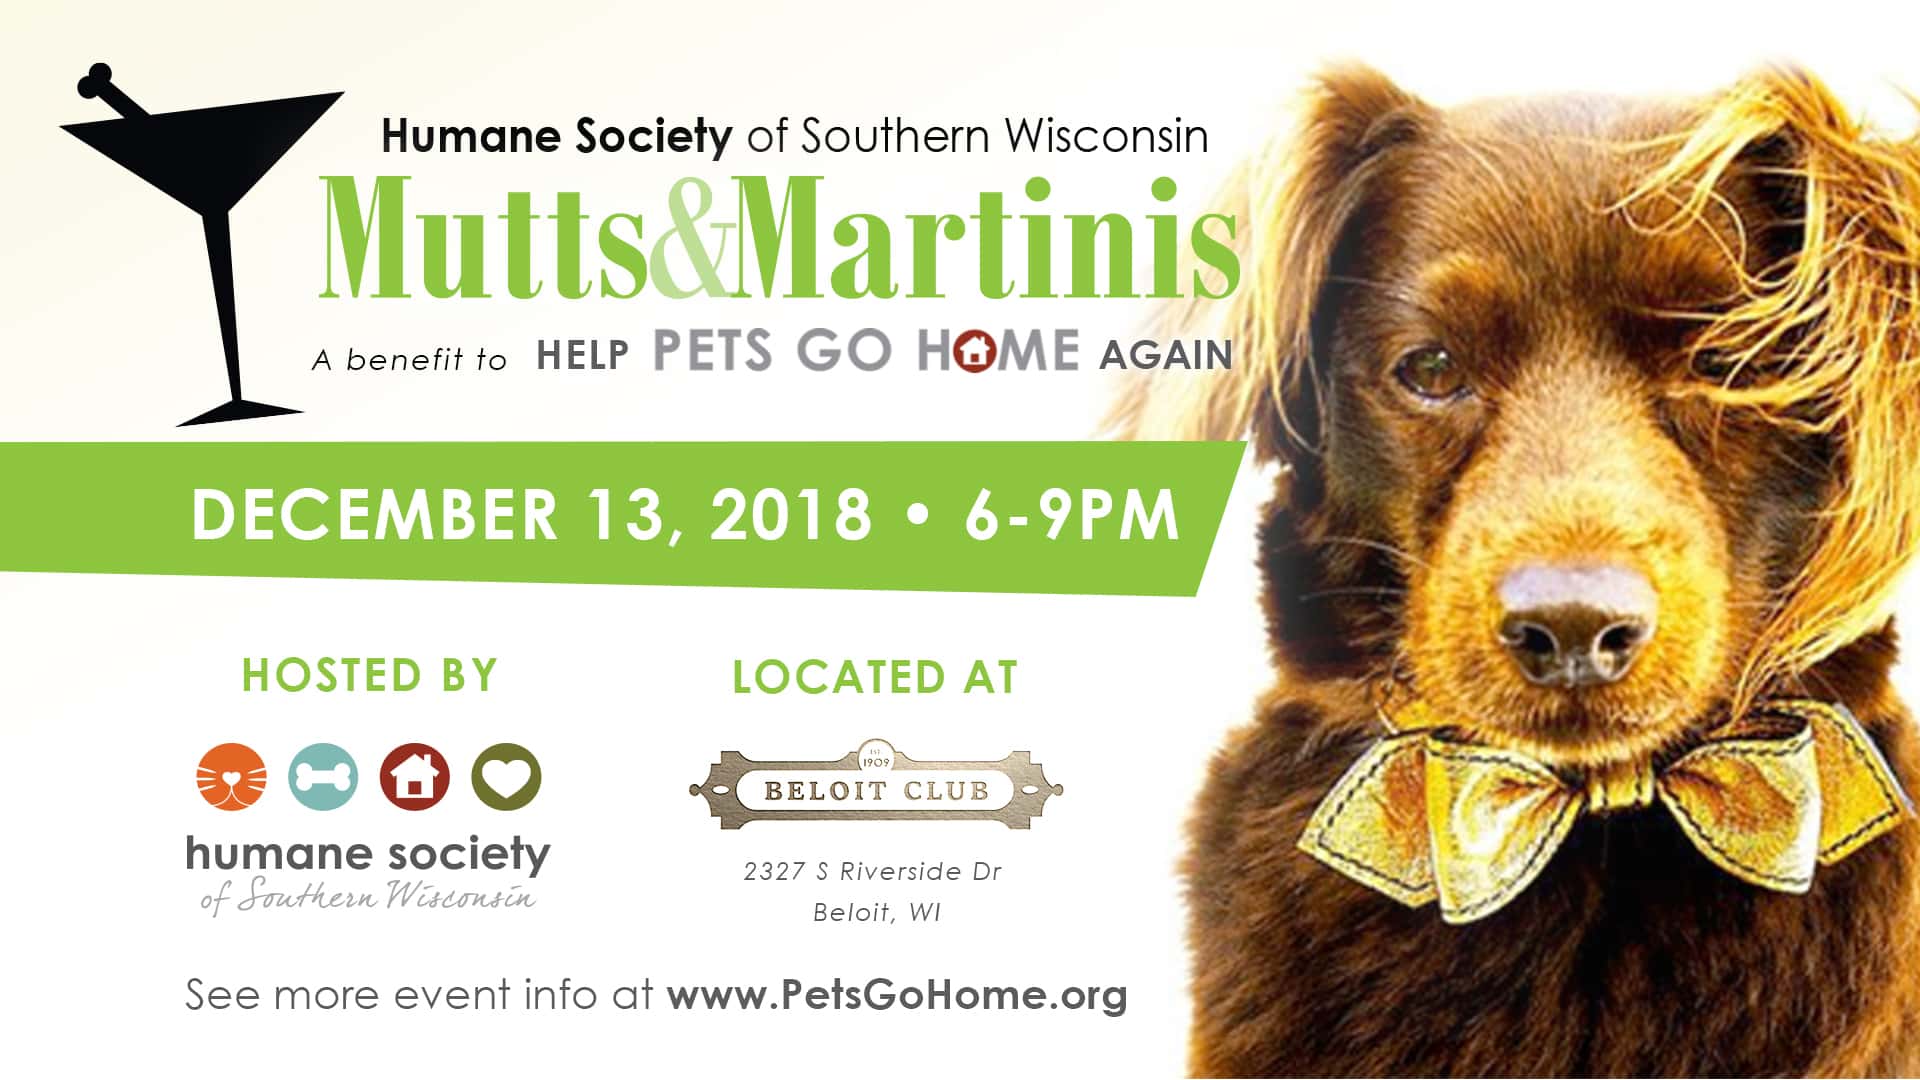 hssw-fb-event-1920x1005-muttsmartinis